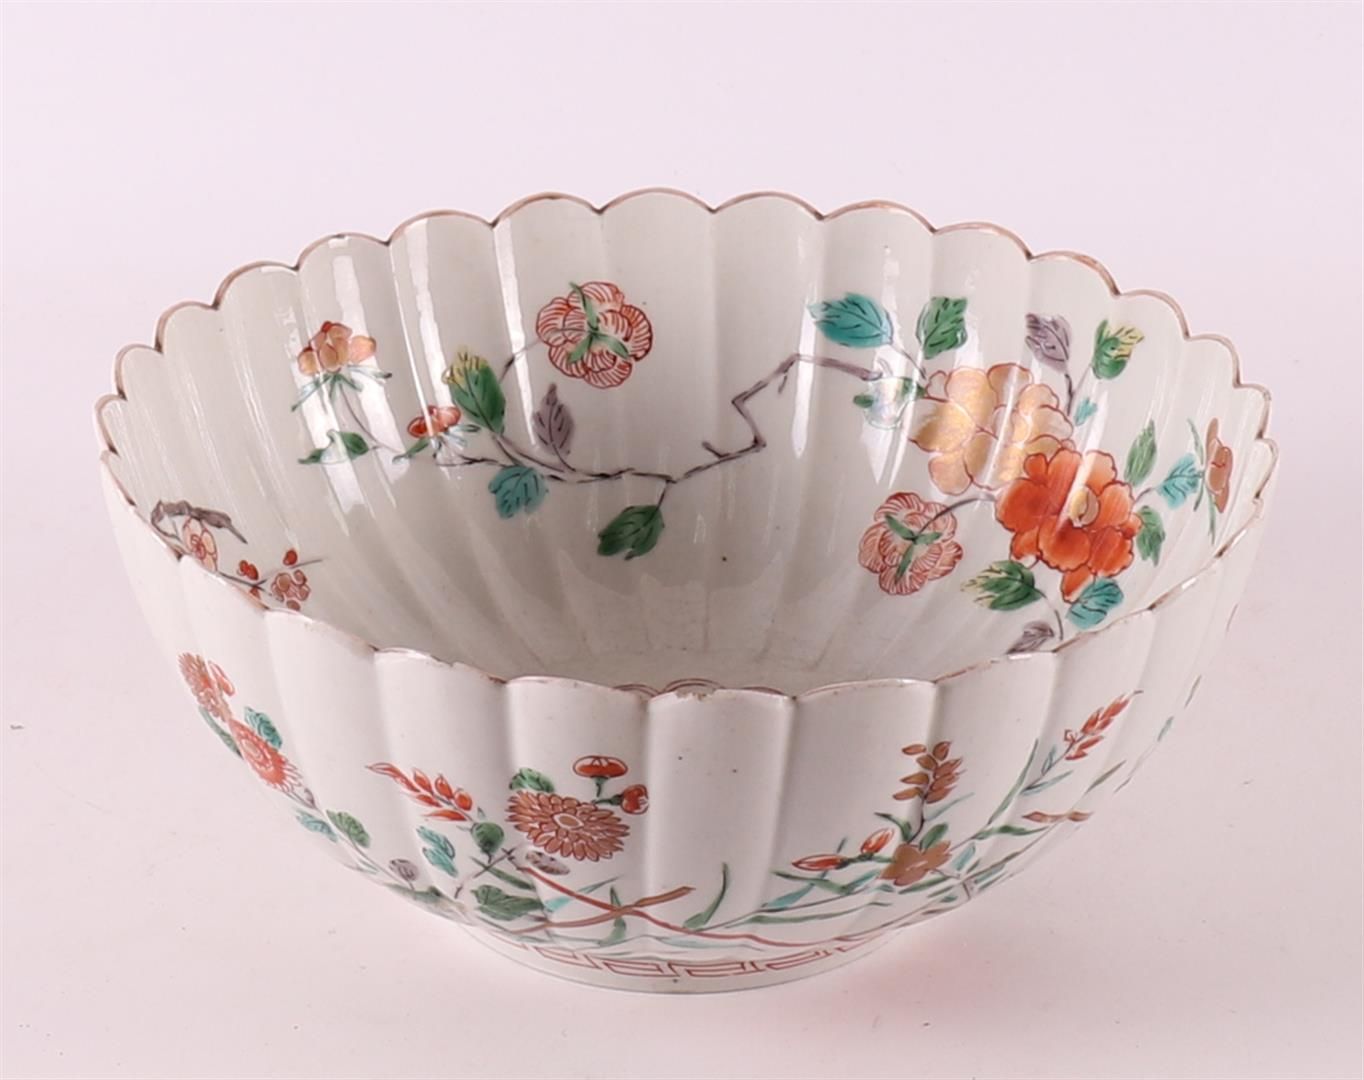 Null A contoured porcelain bowl on a base ring, Japan, 19th century.